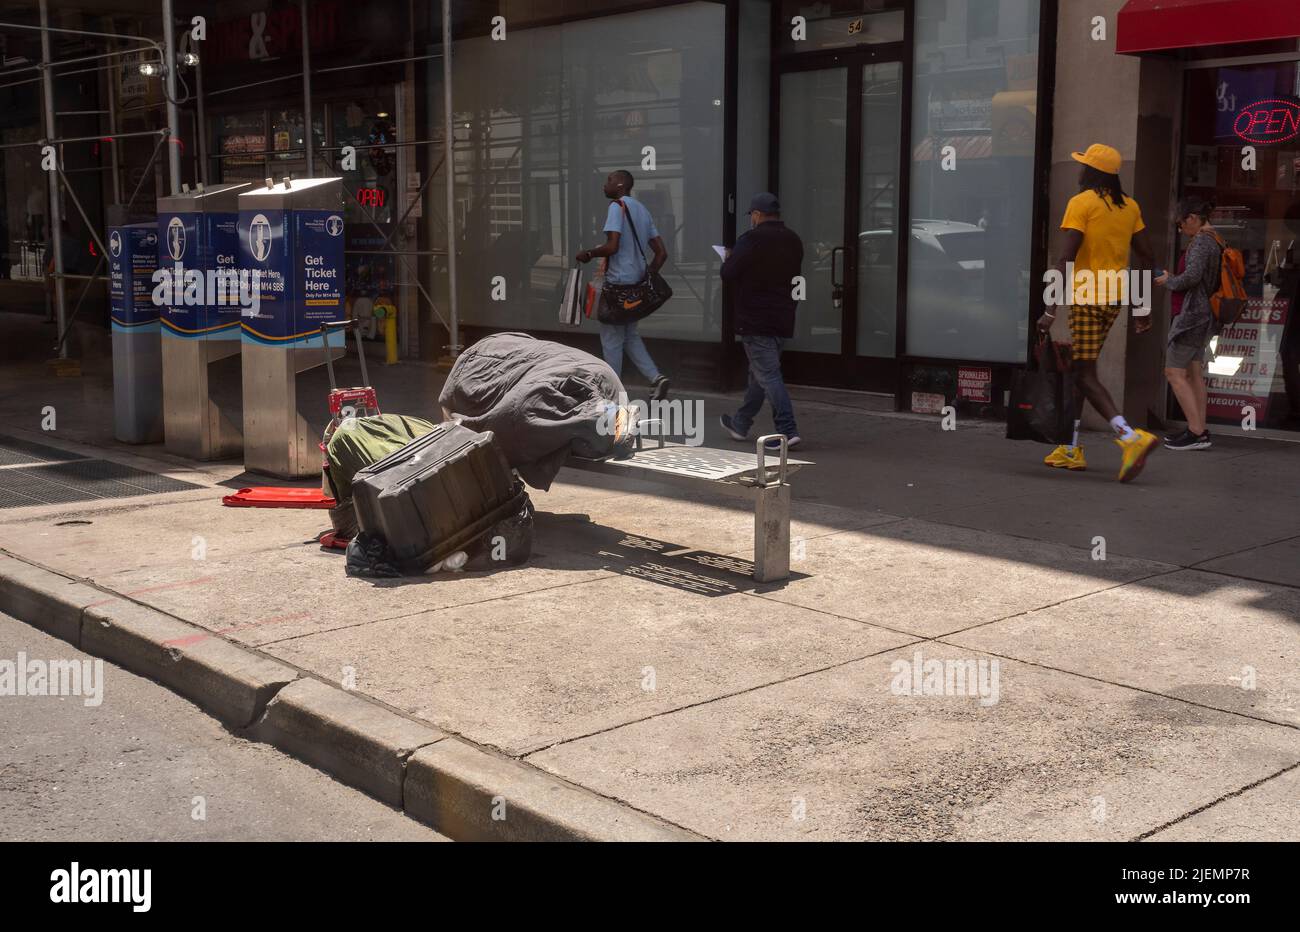 A homeless man sleeps on a bench at a bus stop in New York on Saturday, June 18, 2022. (© Richard B. Levine) Stock Photo